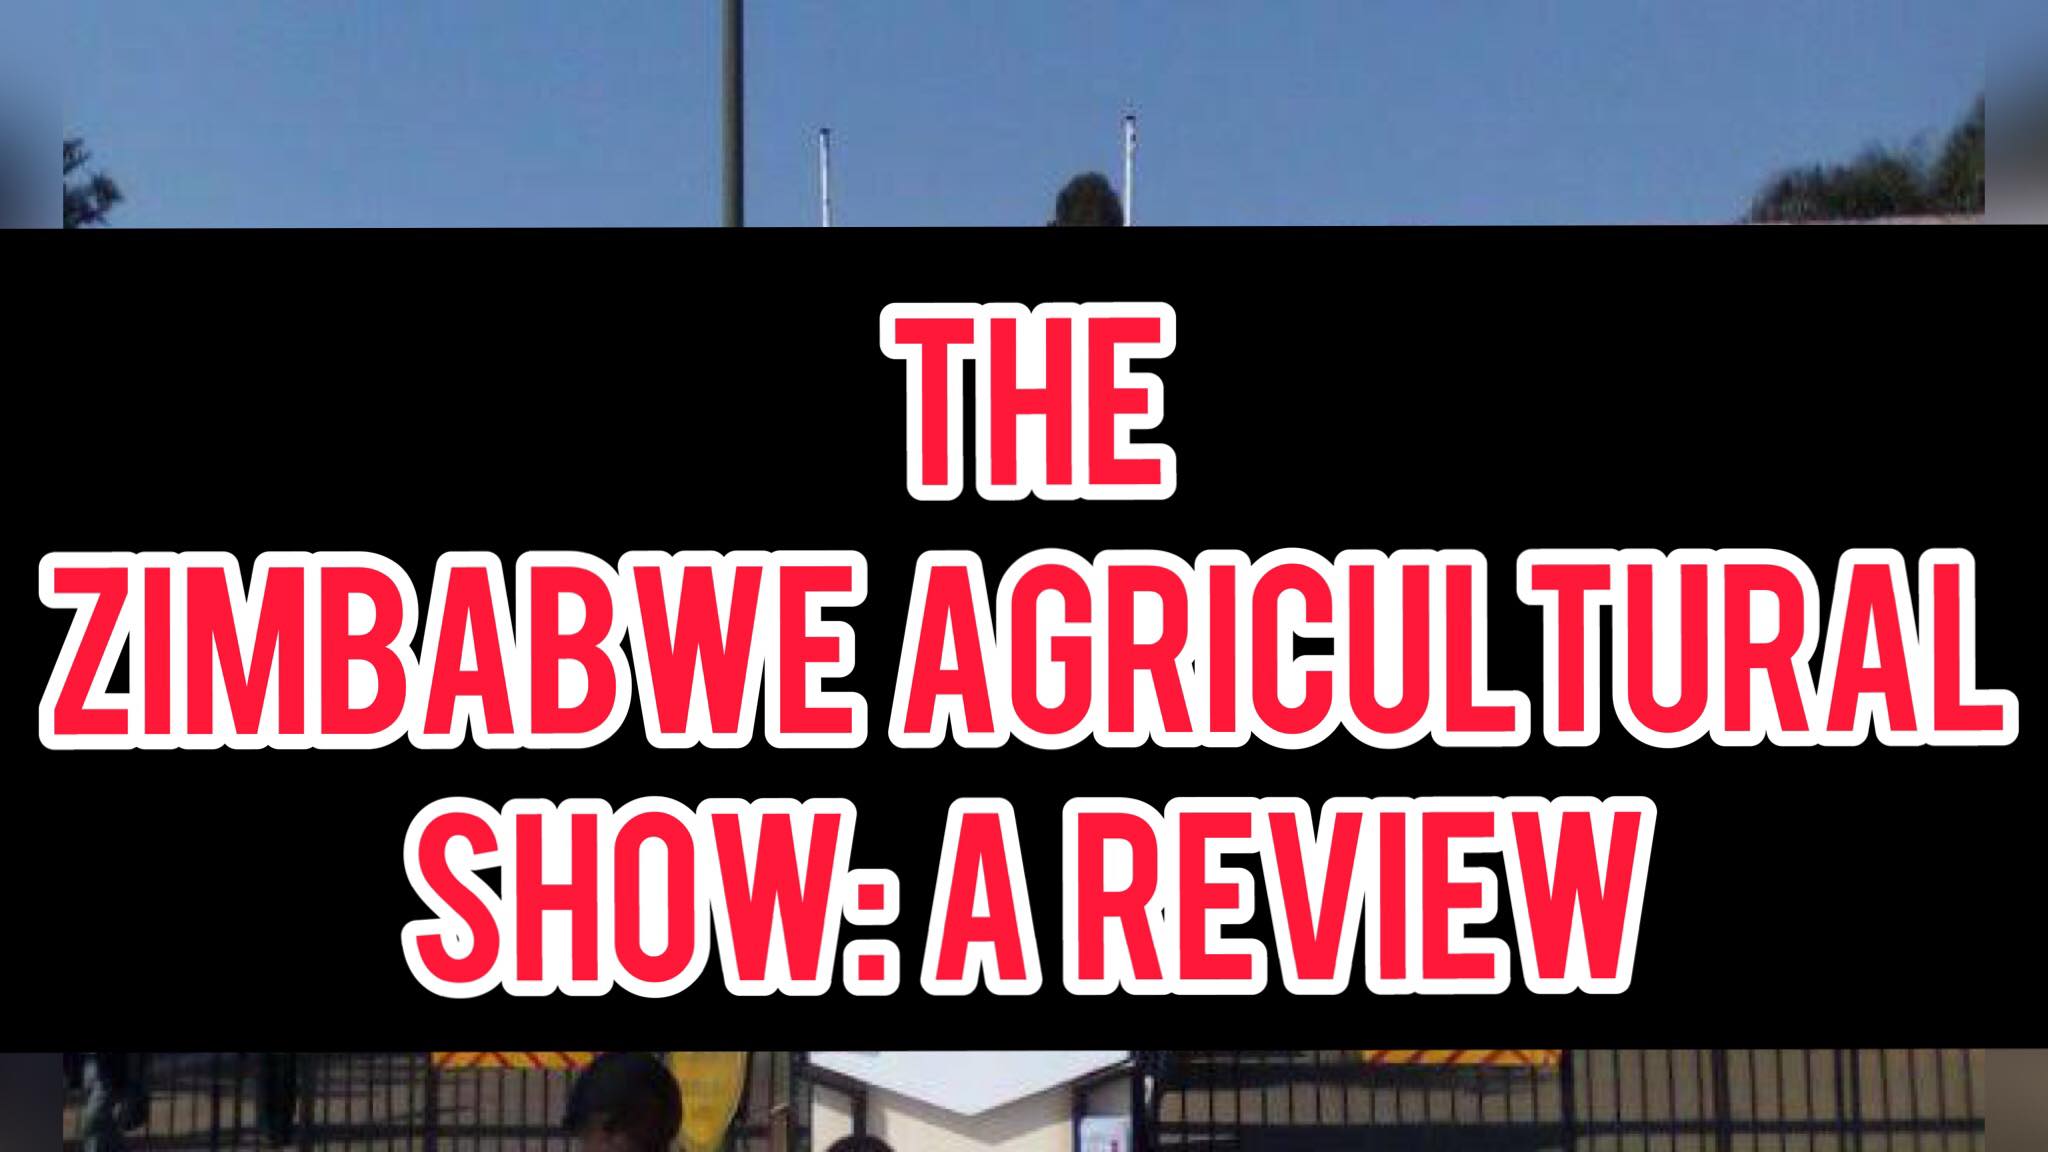 Zimbabwe Agricultural Show